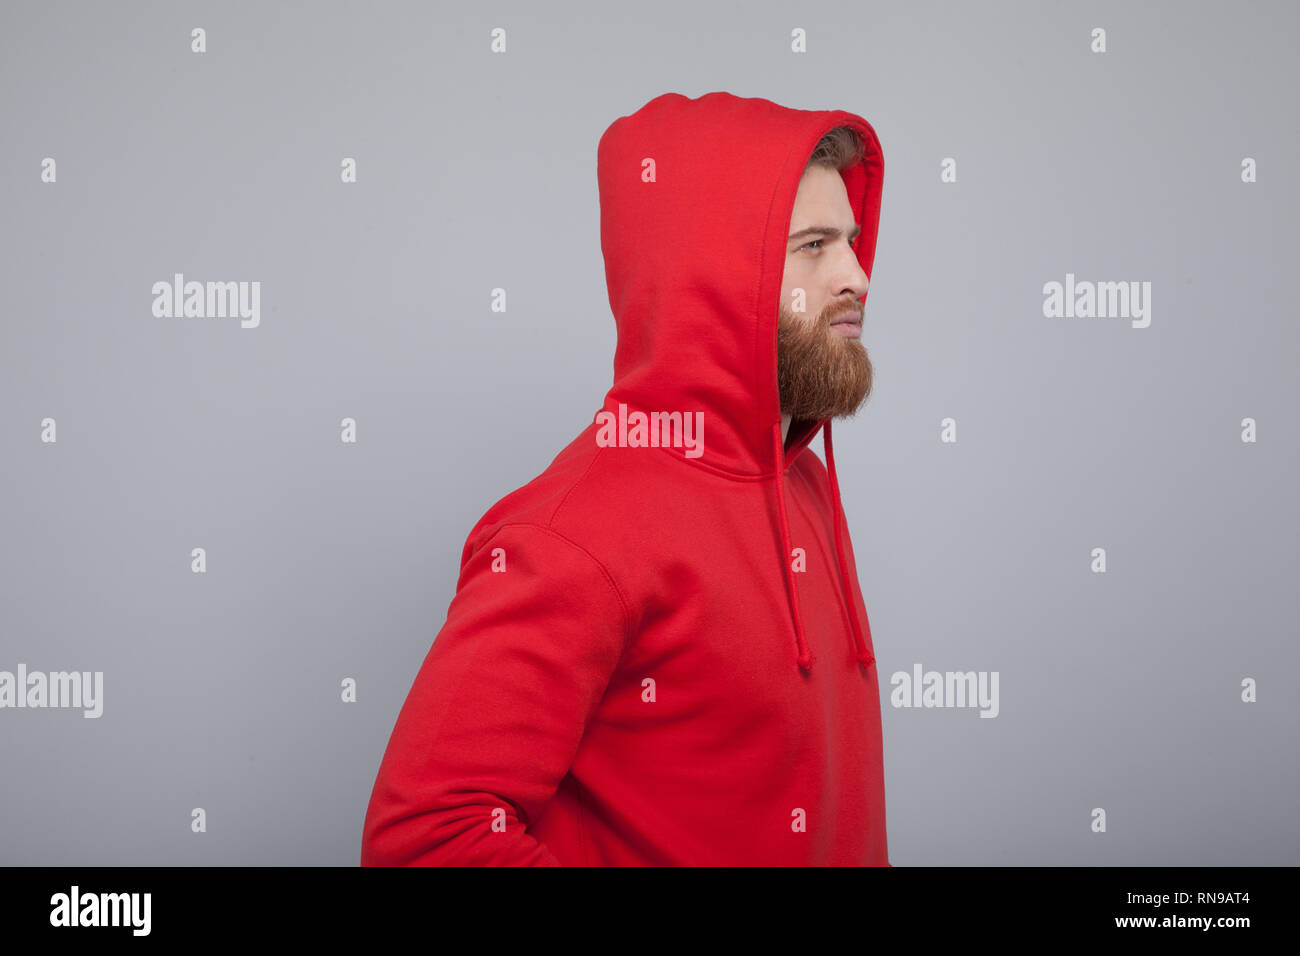 young handsome bearded man rotated in profile wearing red sweatshirt standing at the grey background looking straight in front of him. Stock Photo